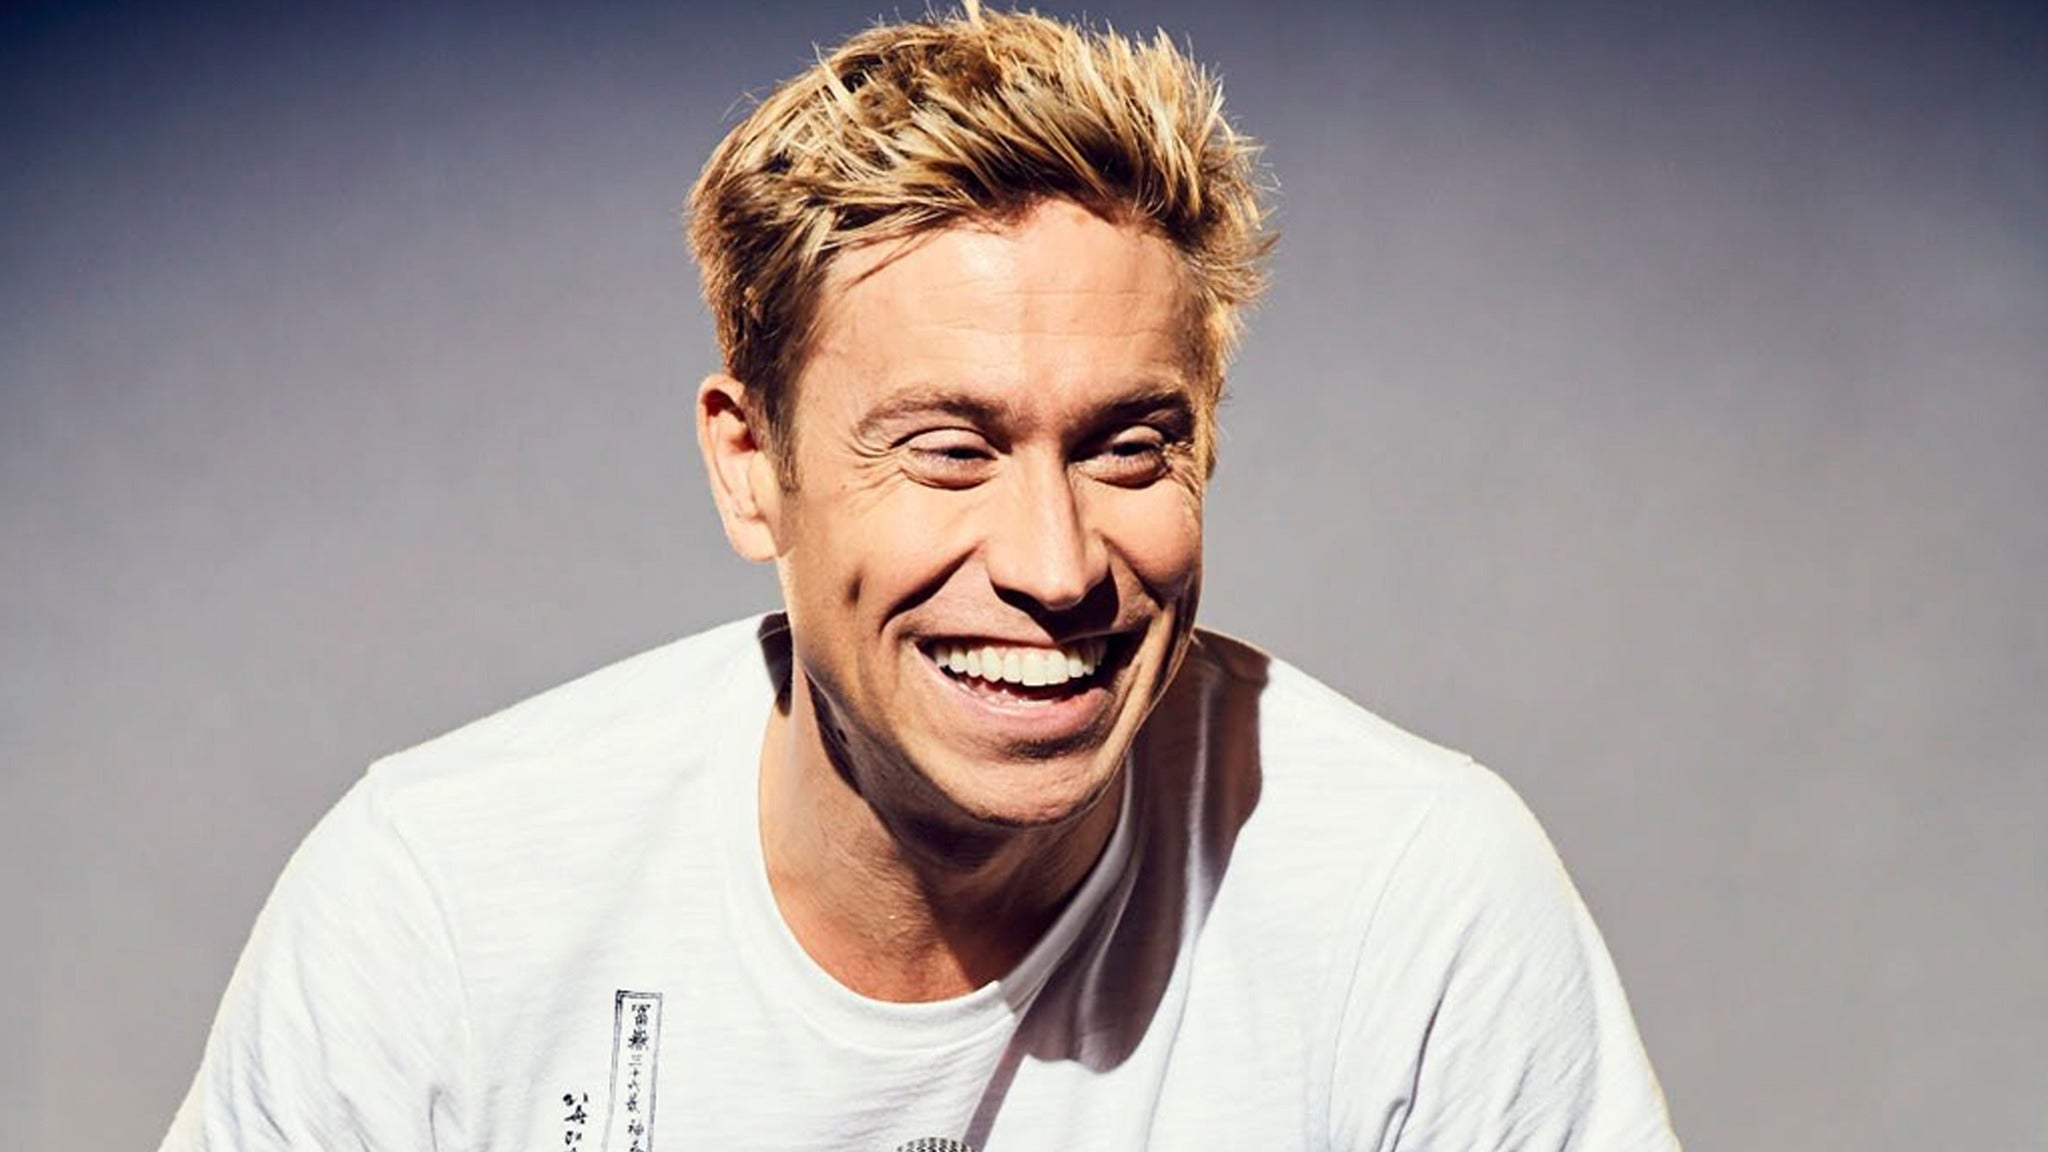 Russell Howard - Respite in New York promo photo for Live Nation presale offer code